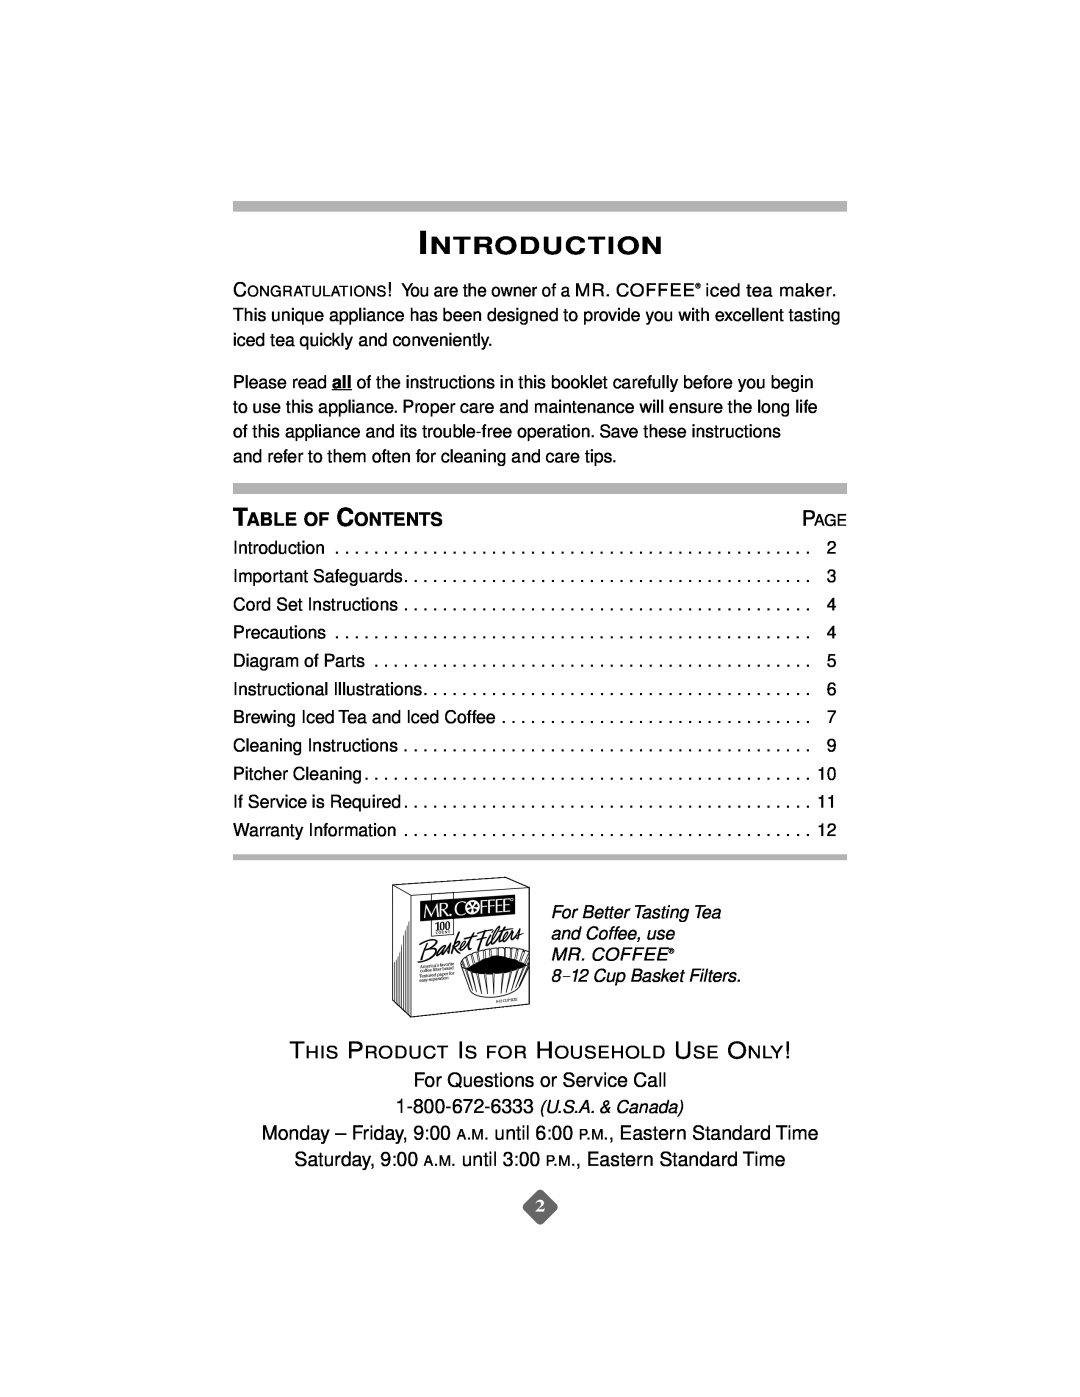 Mr. Coffee TM1 instruction manual Introduction 